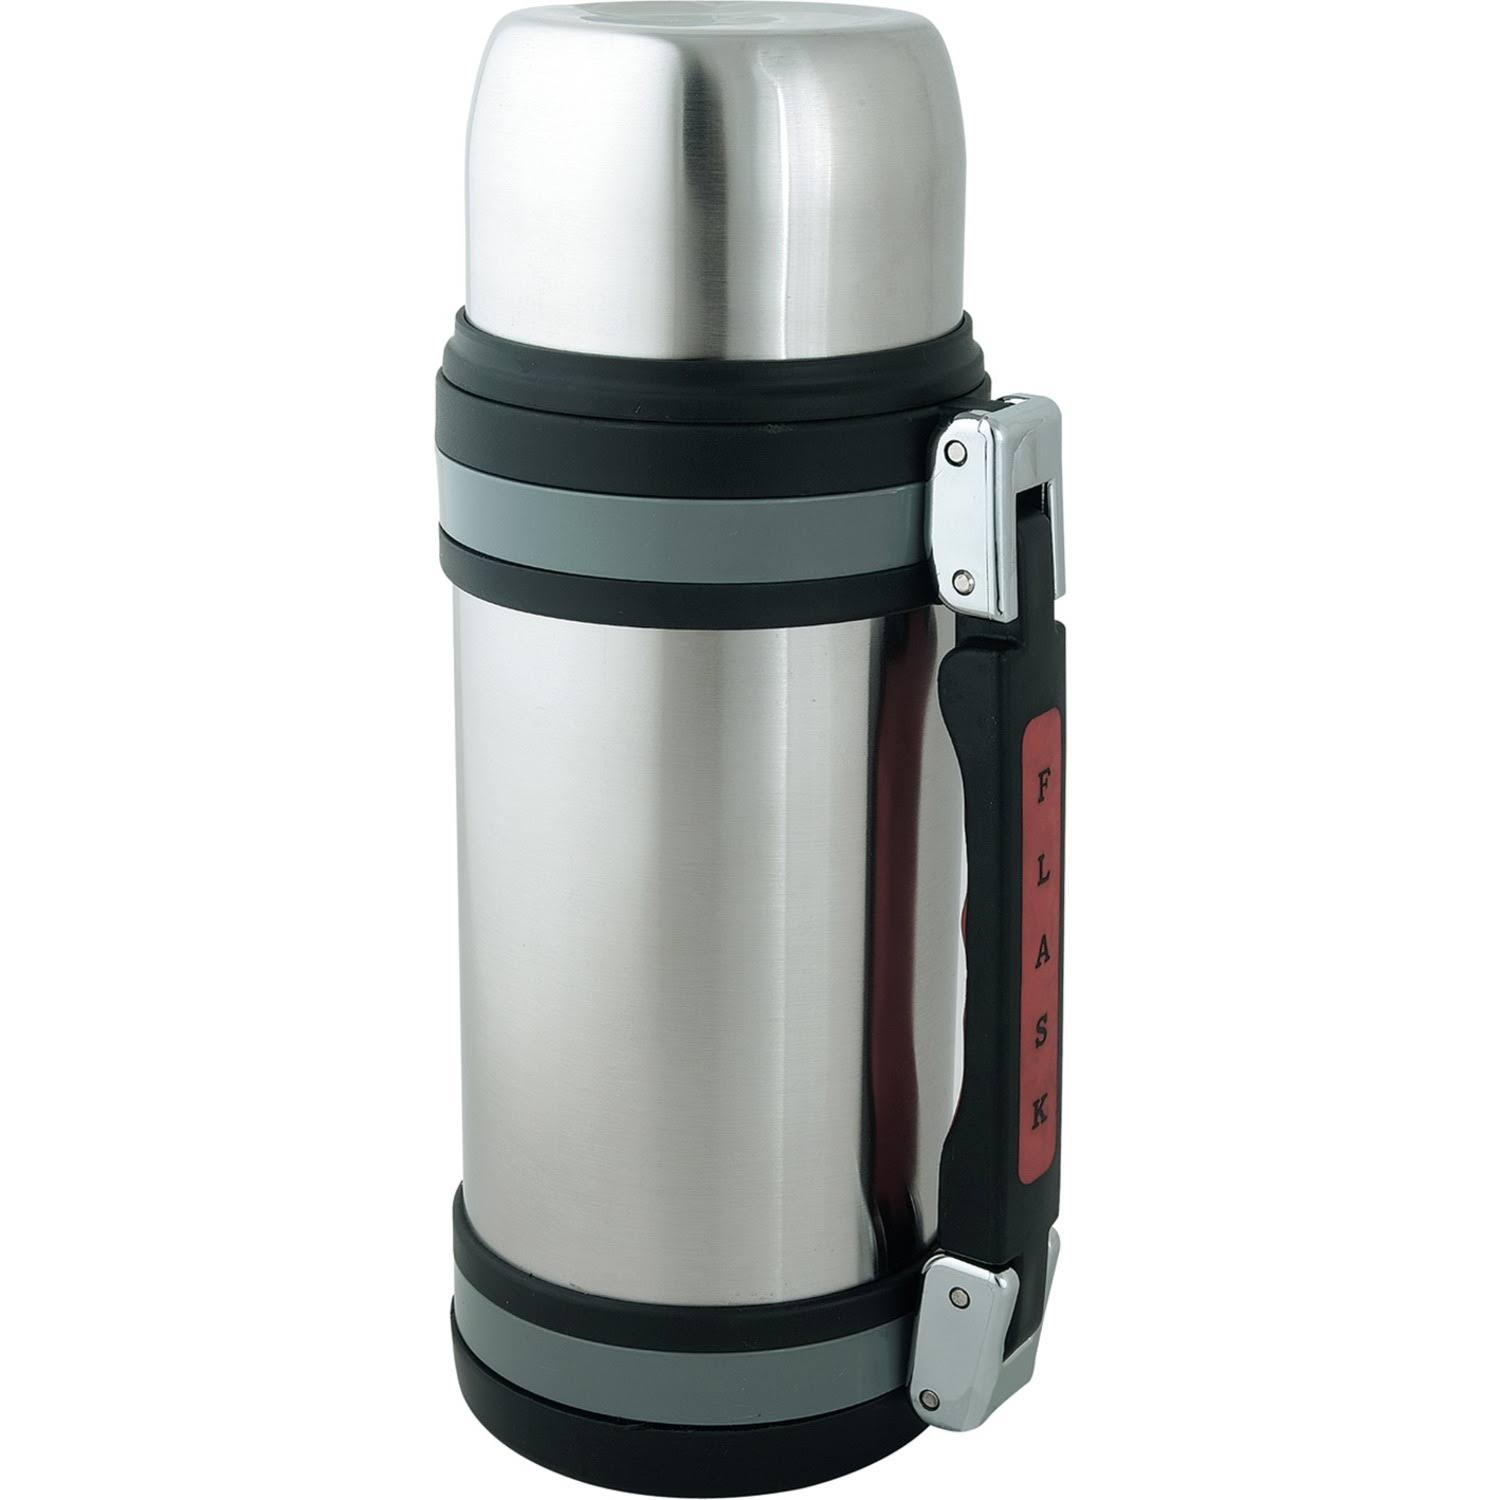 Brentwood Appliances Stainless Steel Vacuum Flask - 1L